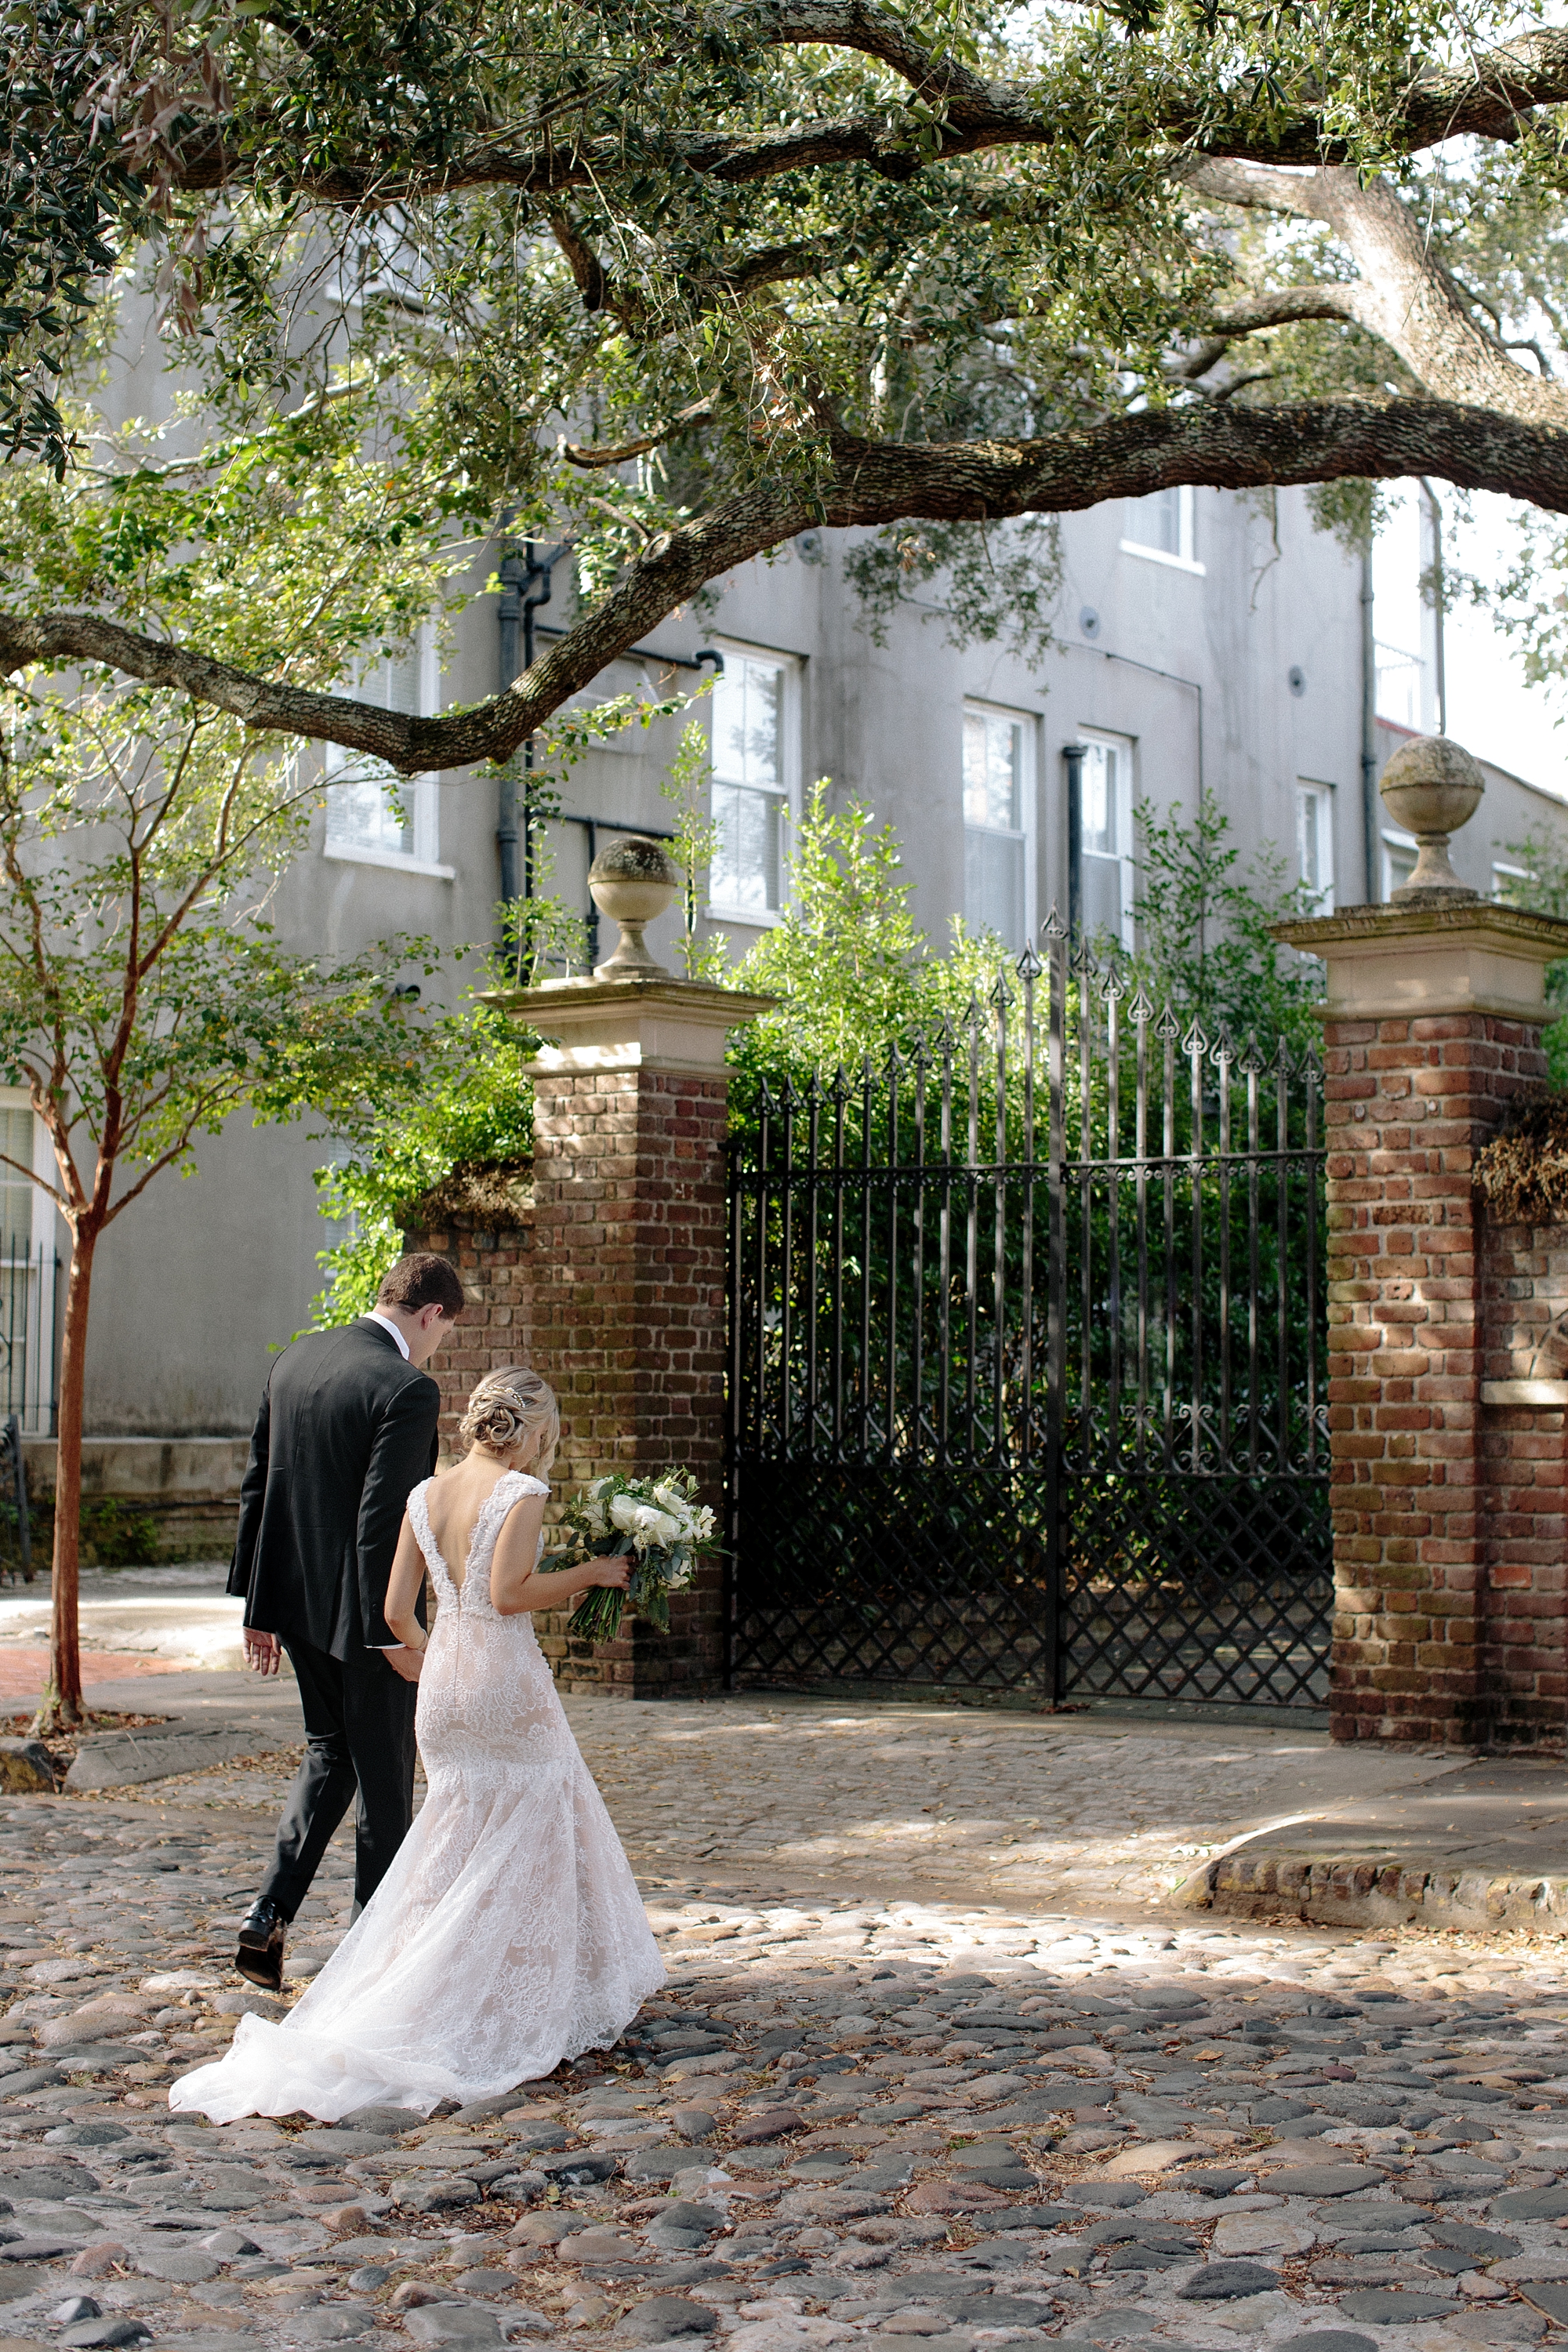 Bride and groom on cobblestone streets. Soft pink and teal blue romantic wedding in Historic Charleston, South Carolina by top Wedding Photographers Leigh and Becca.